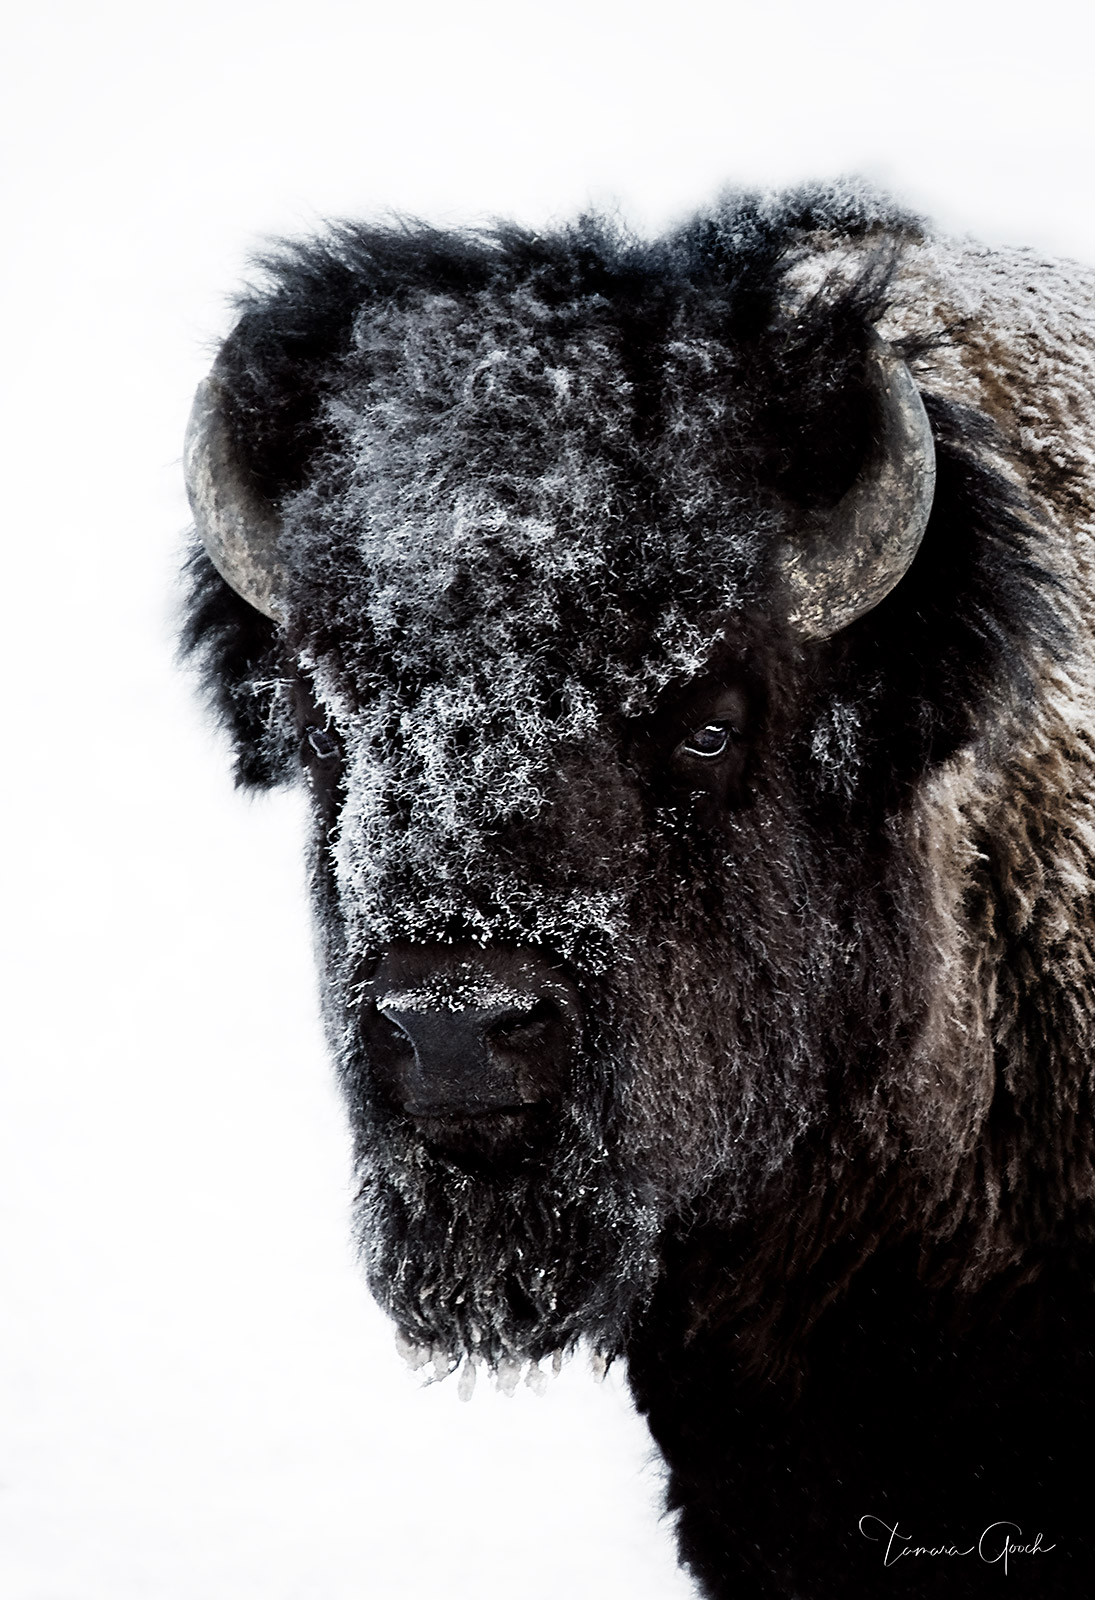 A fine art limited edition print of a bull bison or the American buffalo with a frost covered face. Done in antique black and white tones.